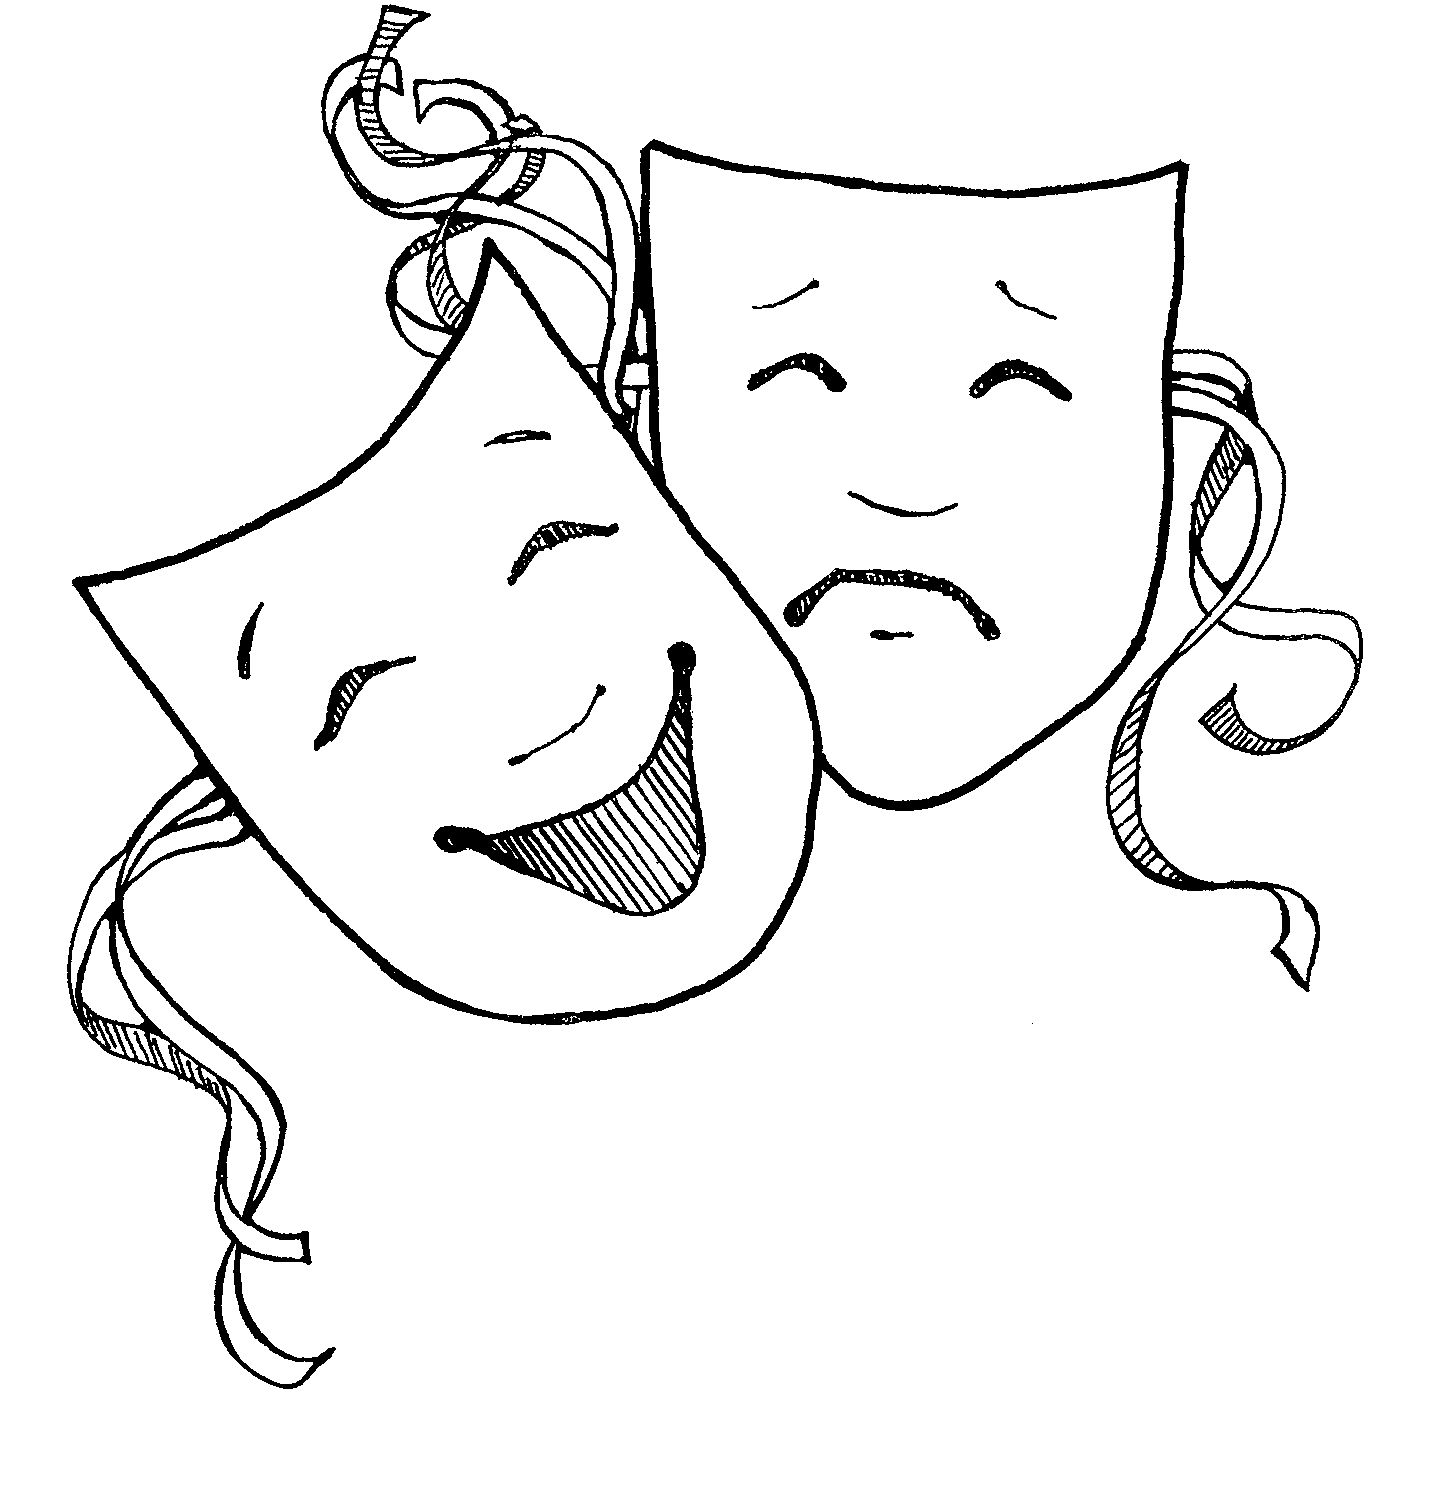 Displaying Images For Theatre Faces Clip Art